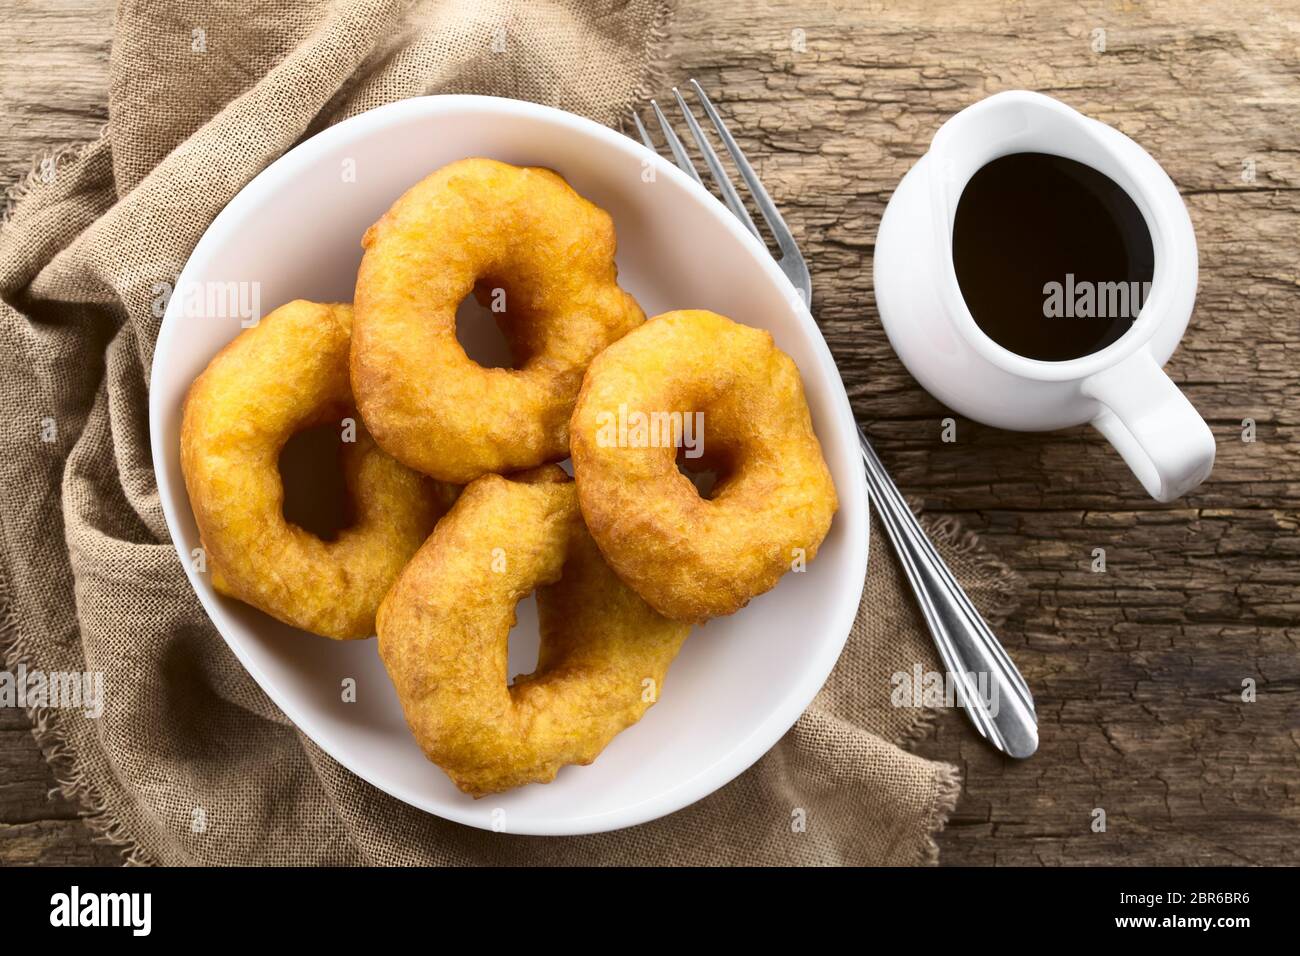 Traditional Chilean Picarones fried pastries made of pumpkin and flour yeast dough, served with sweet chancaca cane sugar sauce, photographed overhead Stock Photo